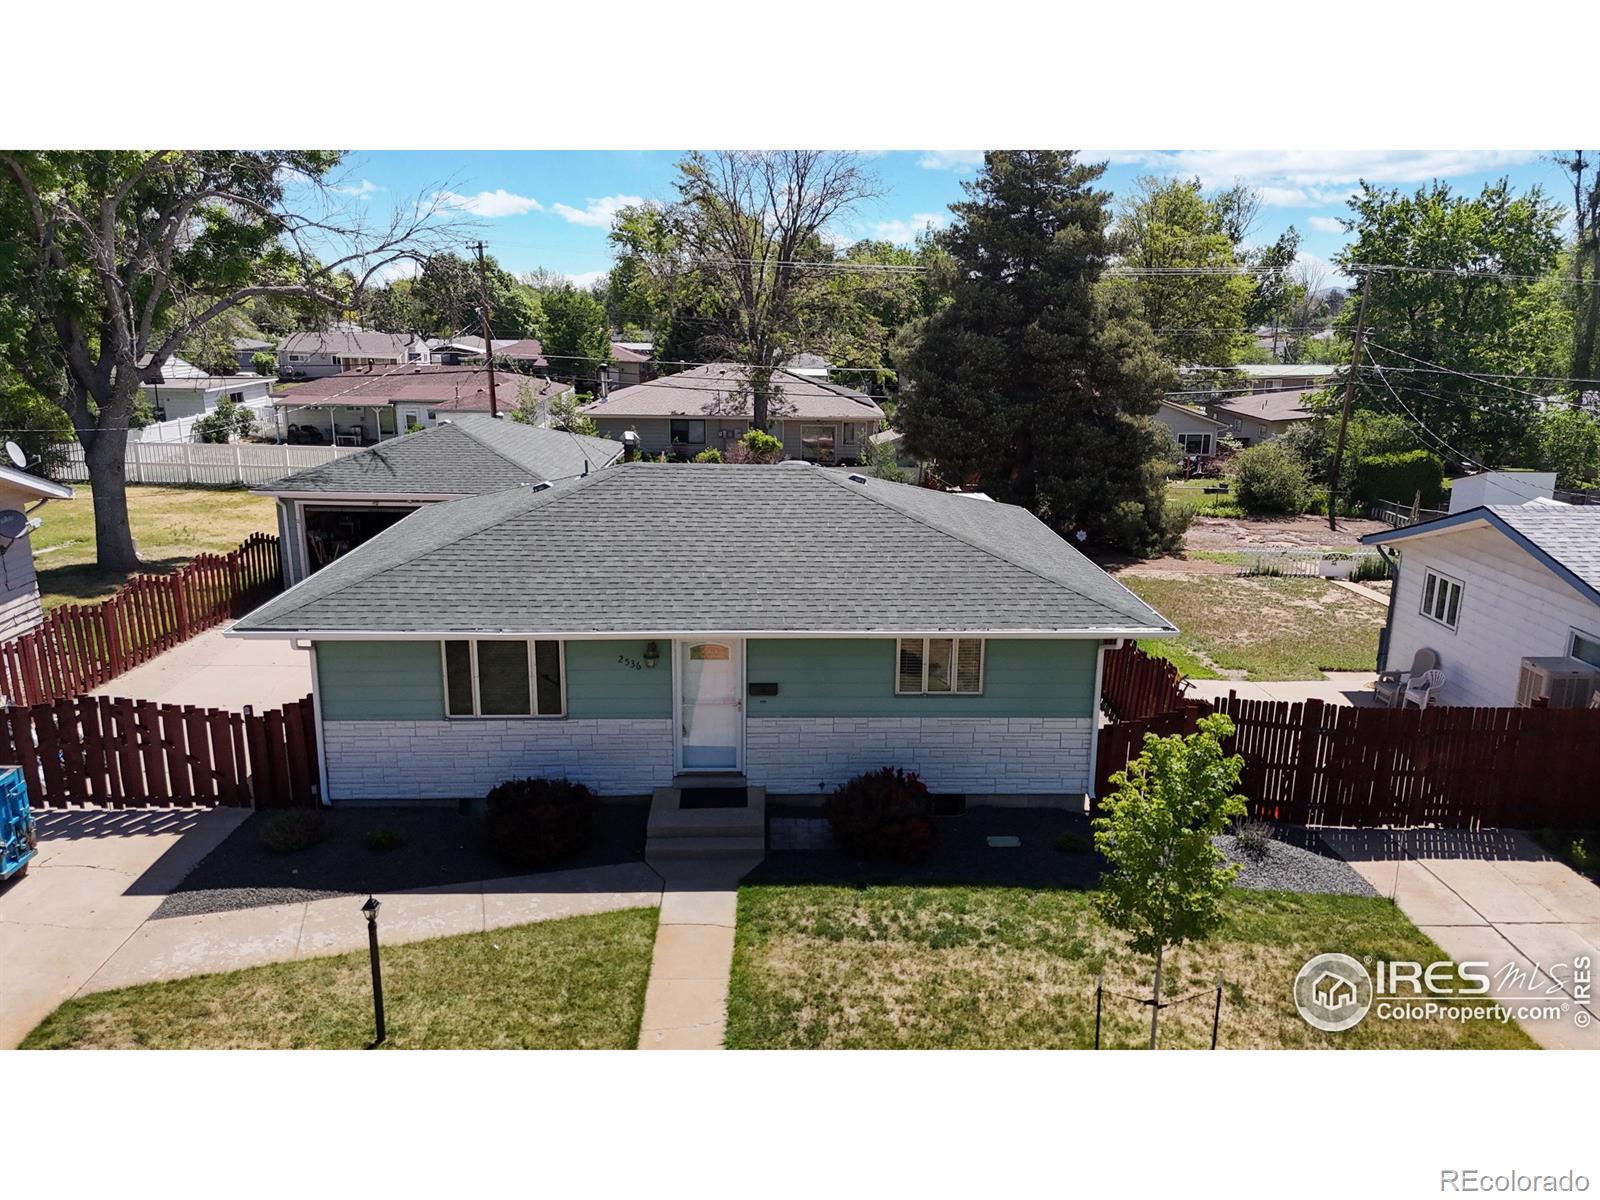 2536  17th Avenue, greeley MLS: 4567891011201 Beds: 4 Baths: 2 Price: $365,000